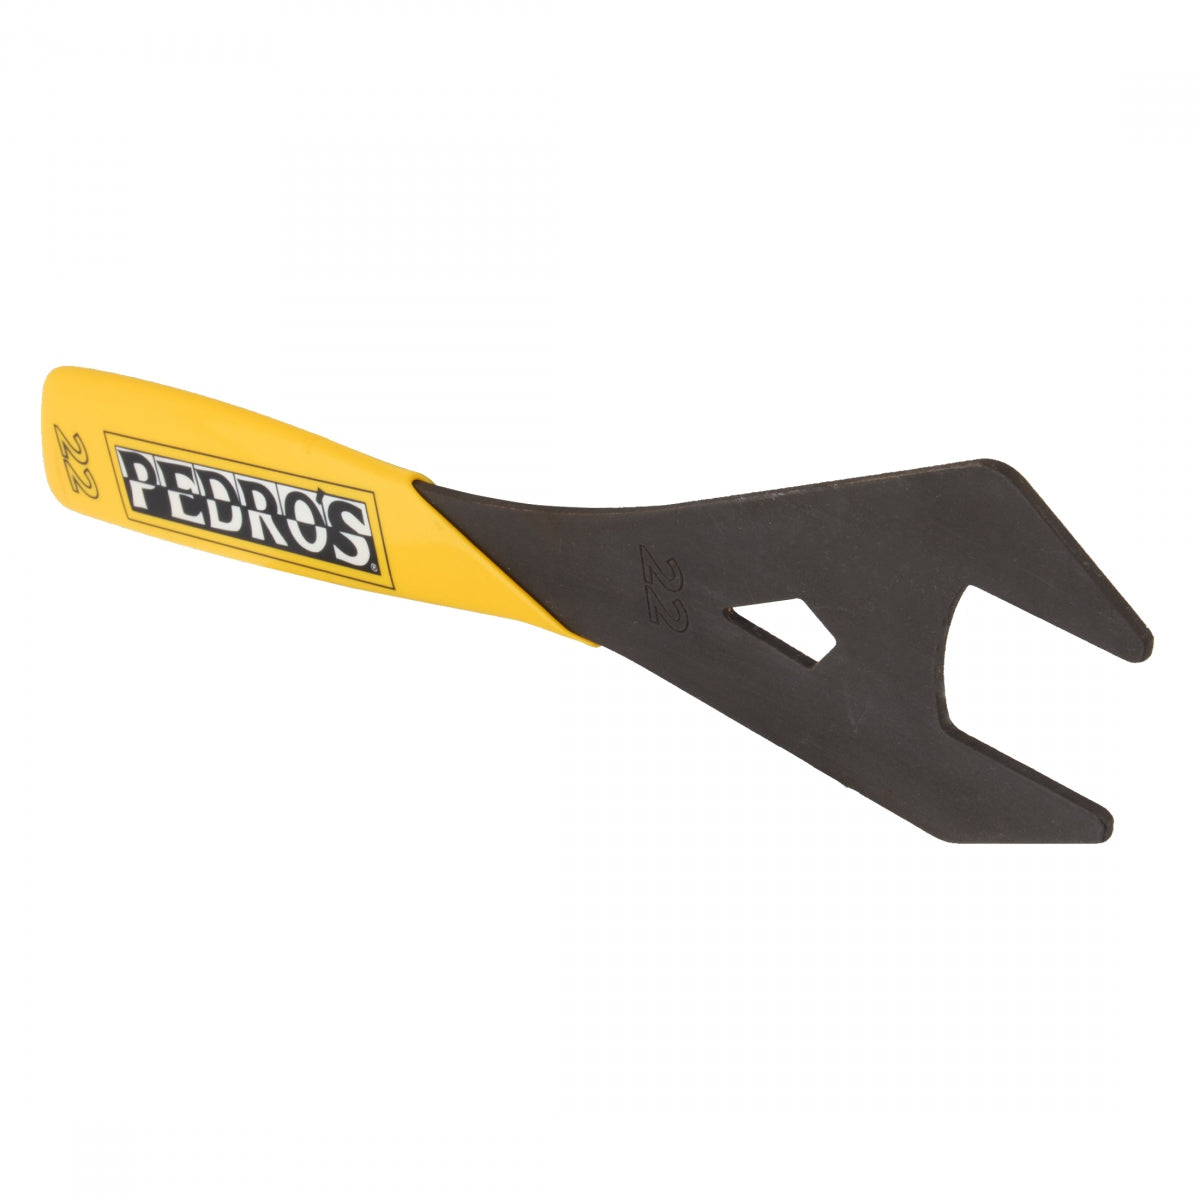 Tool Hub Cone Wrench Pedros 22Mm (I)